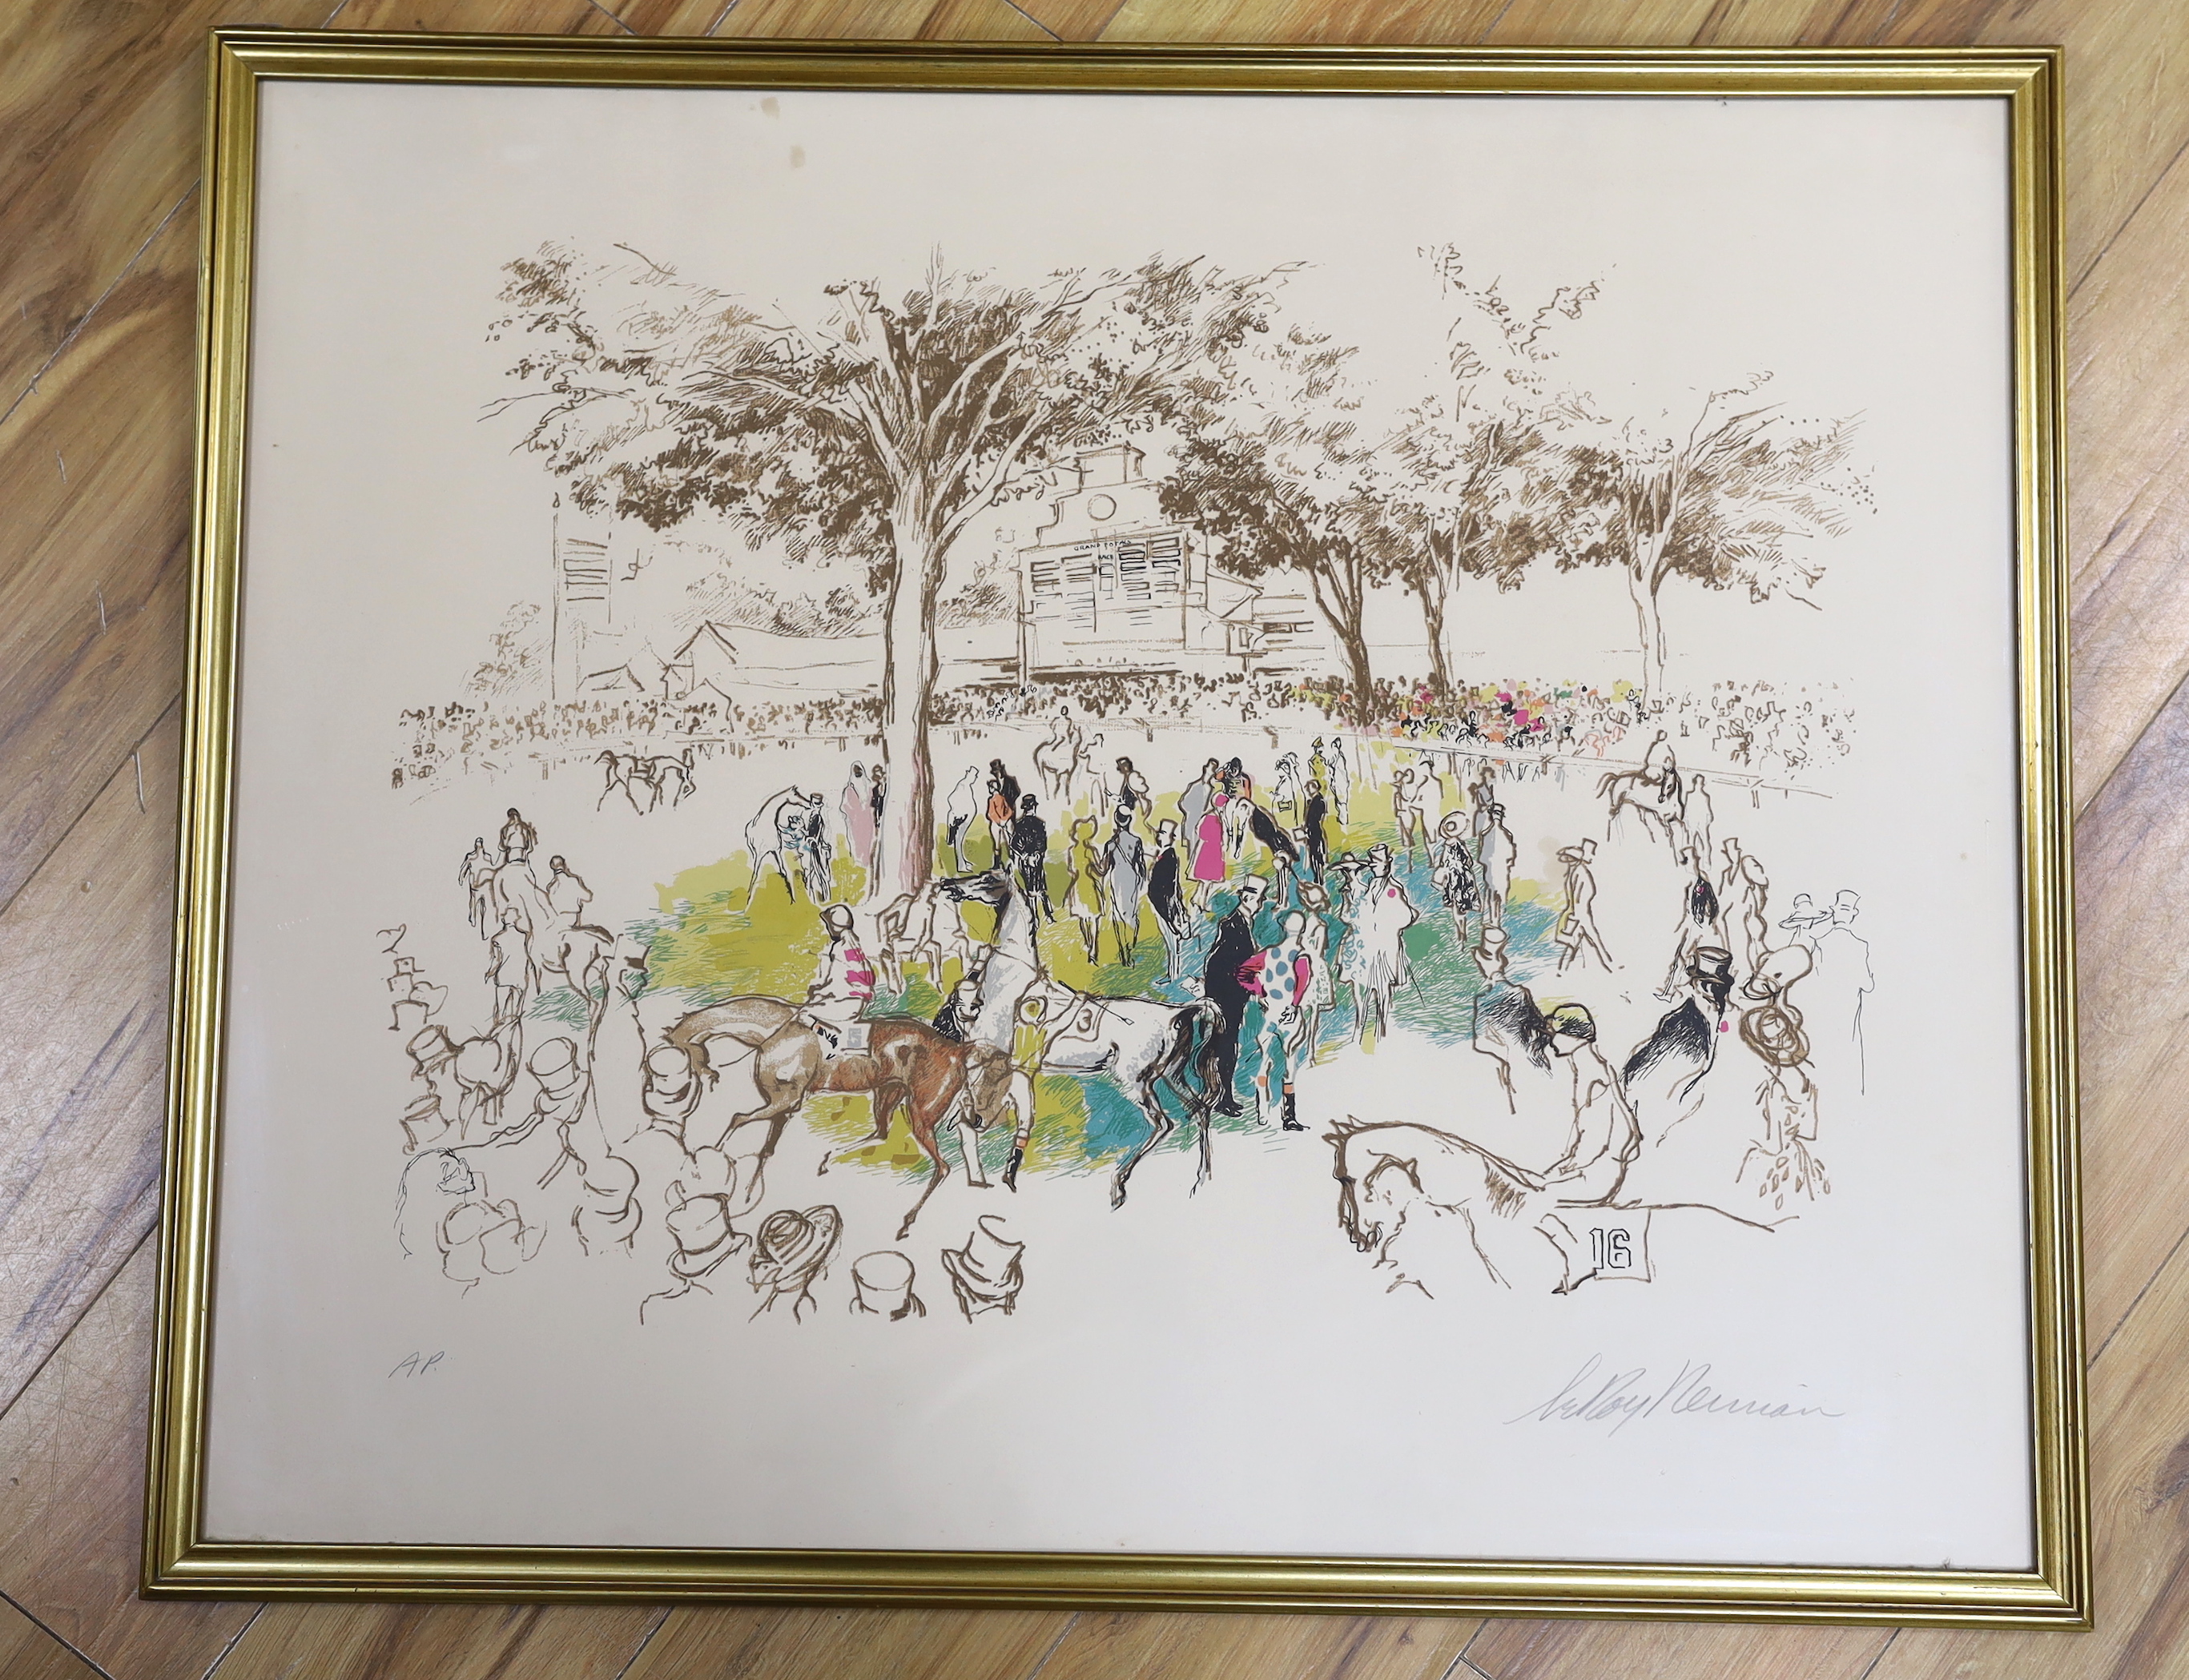 LeRoy Neiman (American, 1921-2012), artist proof colour serigraph, 'Ascot Paddock', signed in pencil, 73 x 88cm